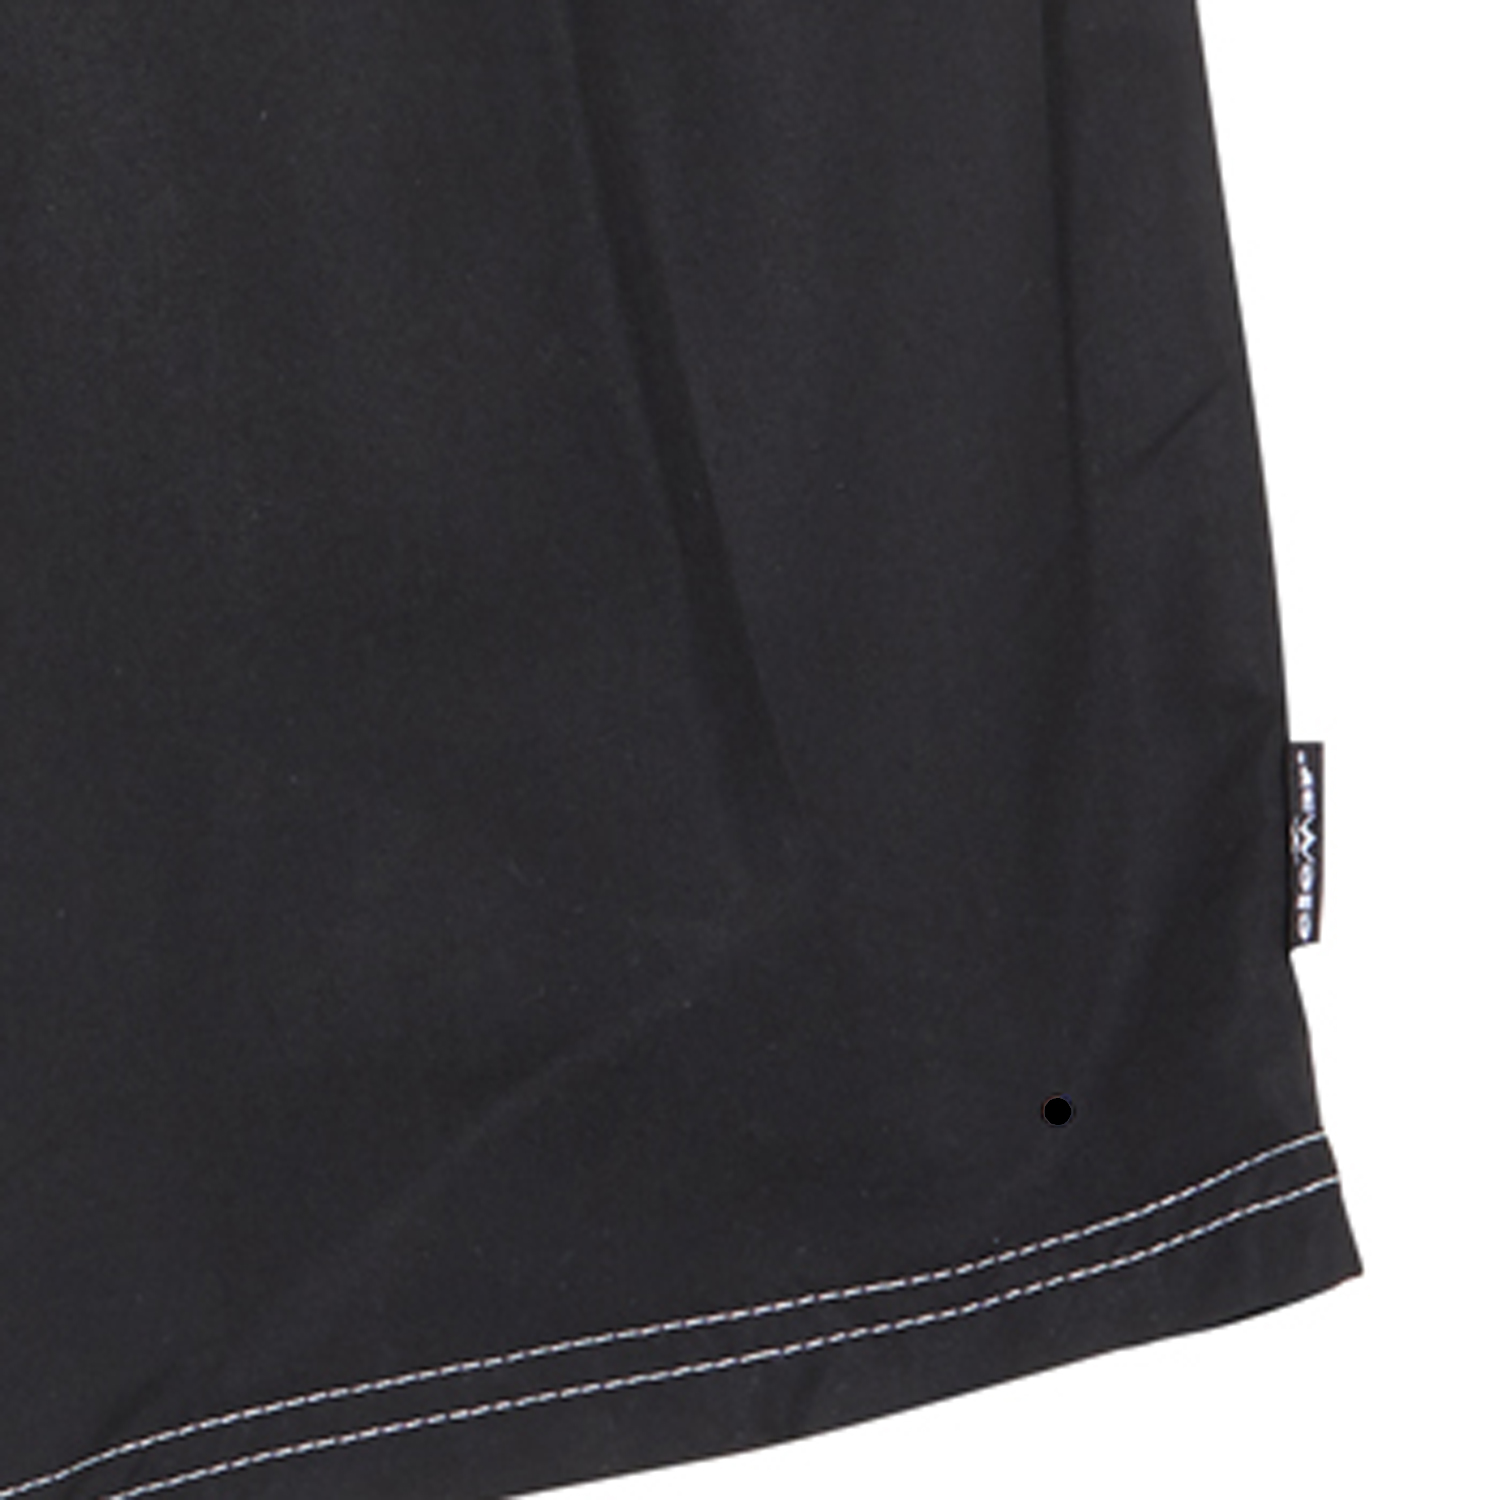 Swim shorts by eleMar for men black in oversizes up to 10XL